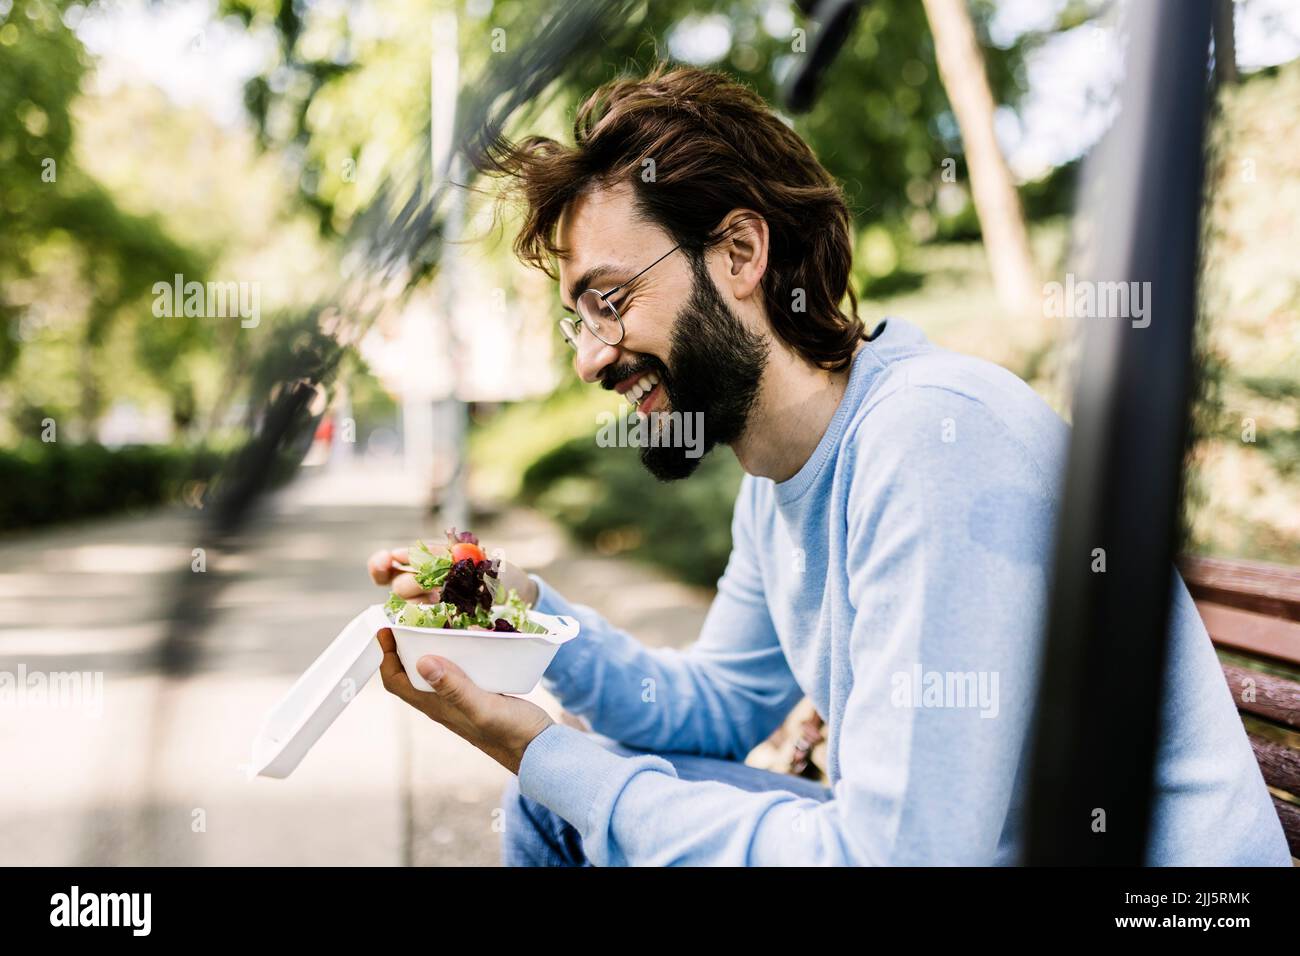 Smiling bearded man with salad sitting in park Stock Photo